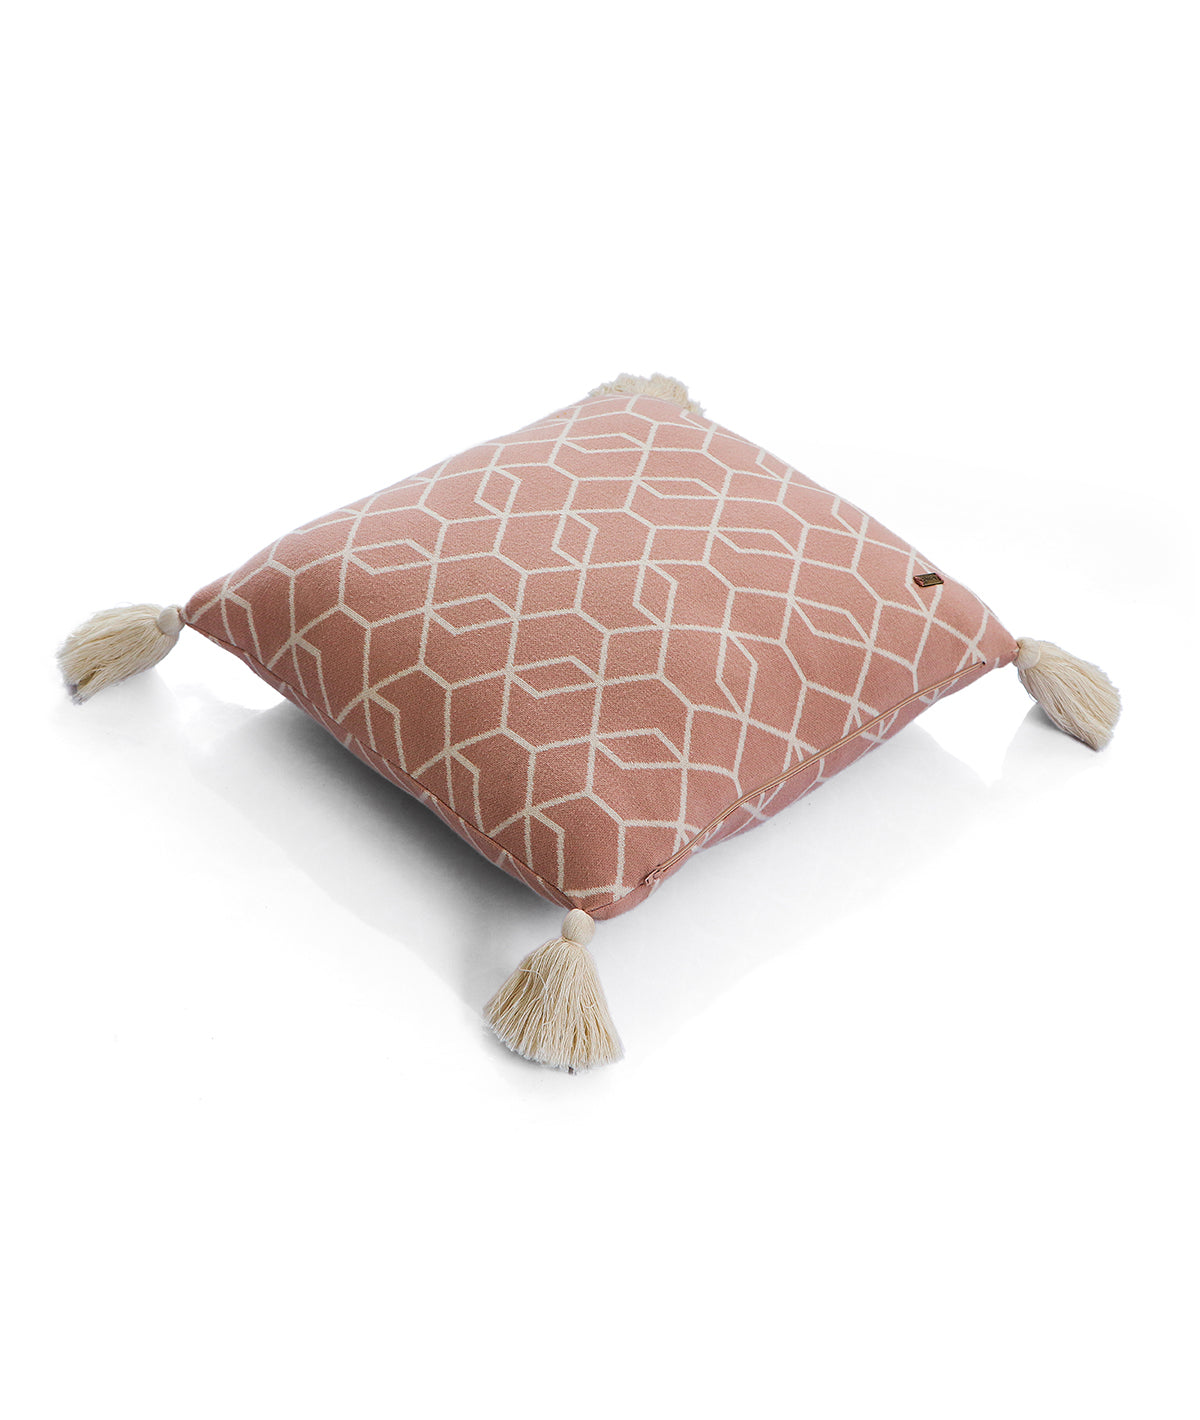 Trellis Cotton Knitted Decorative Blush Pink & Natural Color 16 x 16 Inches Cushion Cover